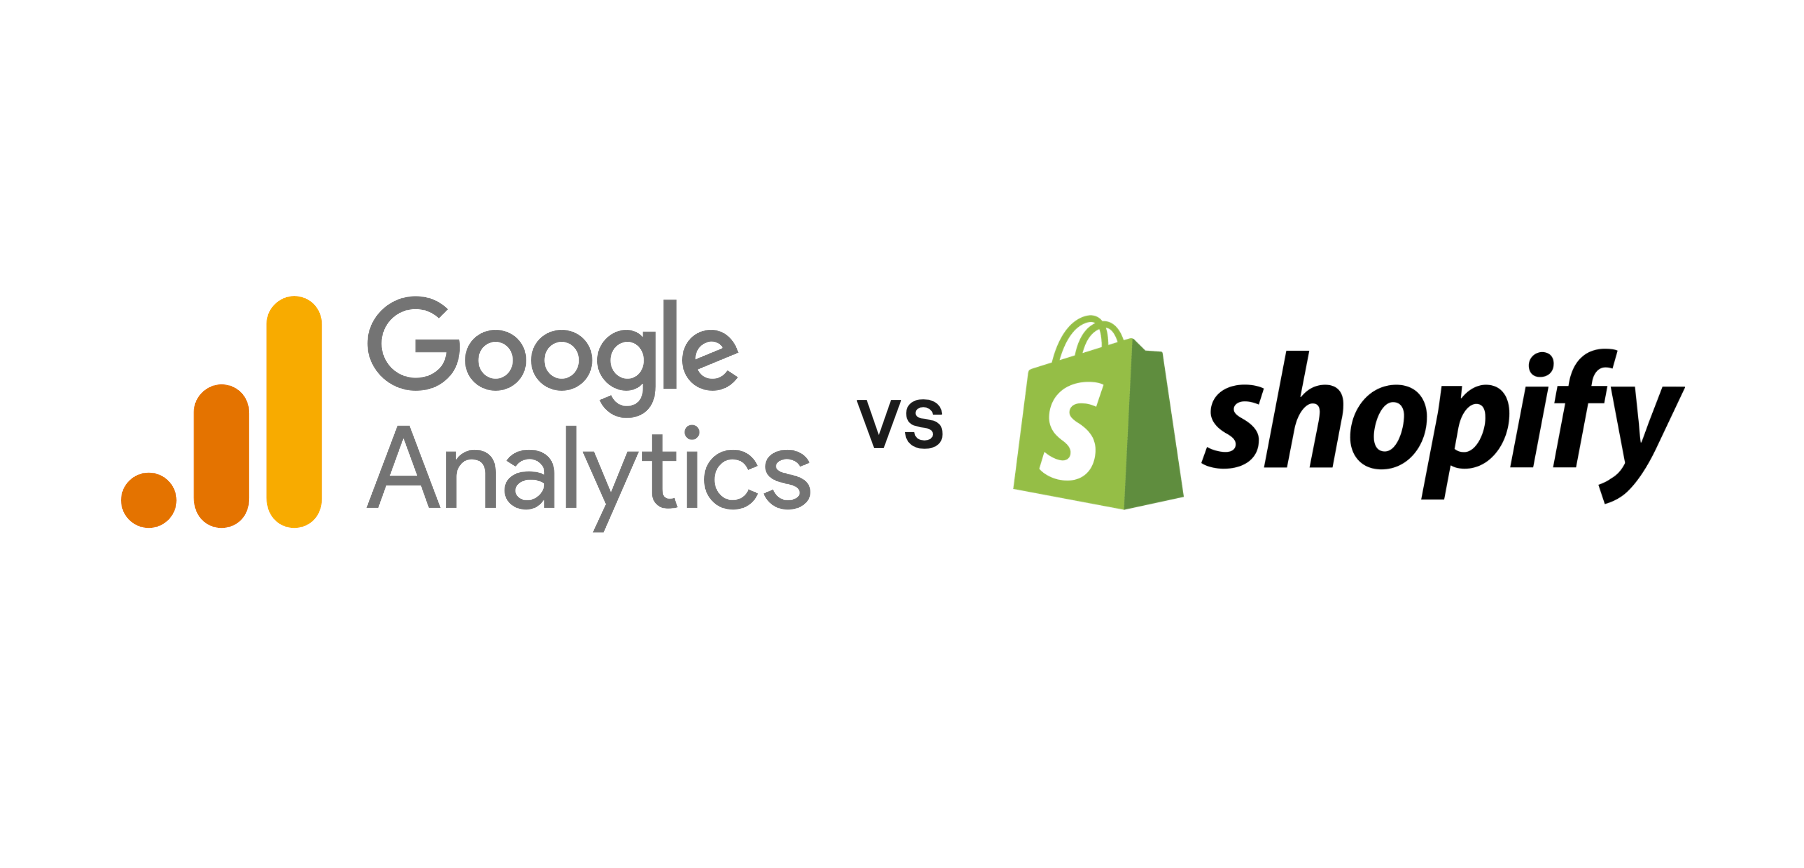 Why use Shopify data instead of Google Analytics in media optimization?